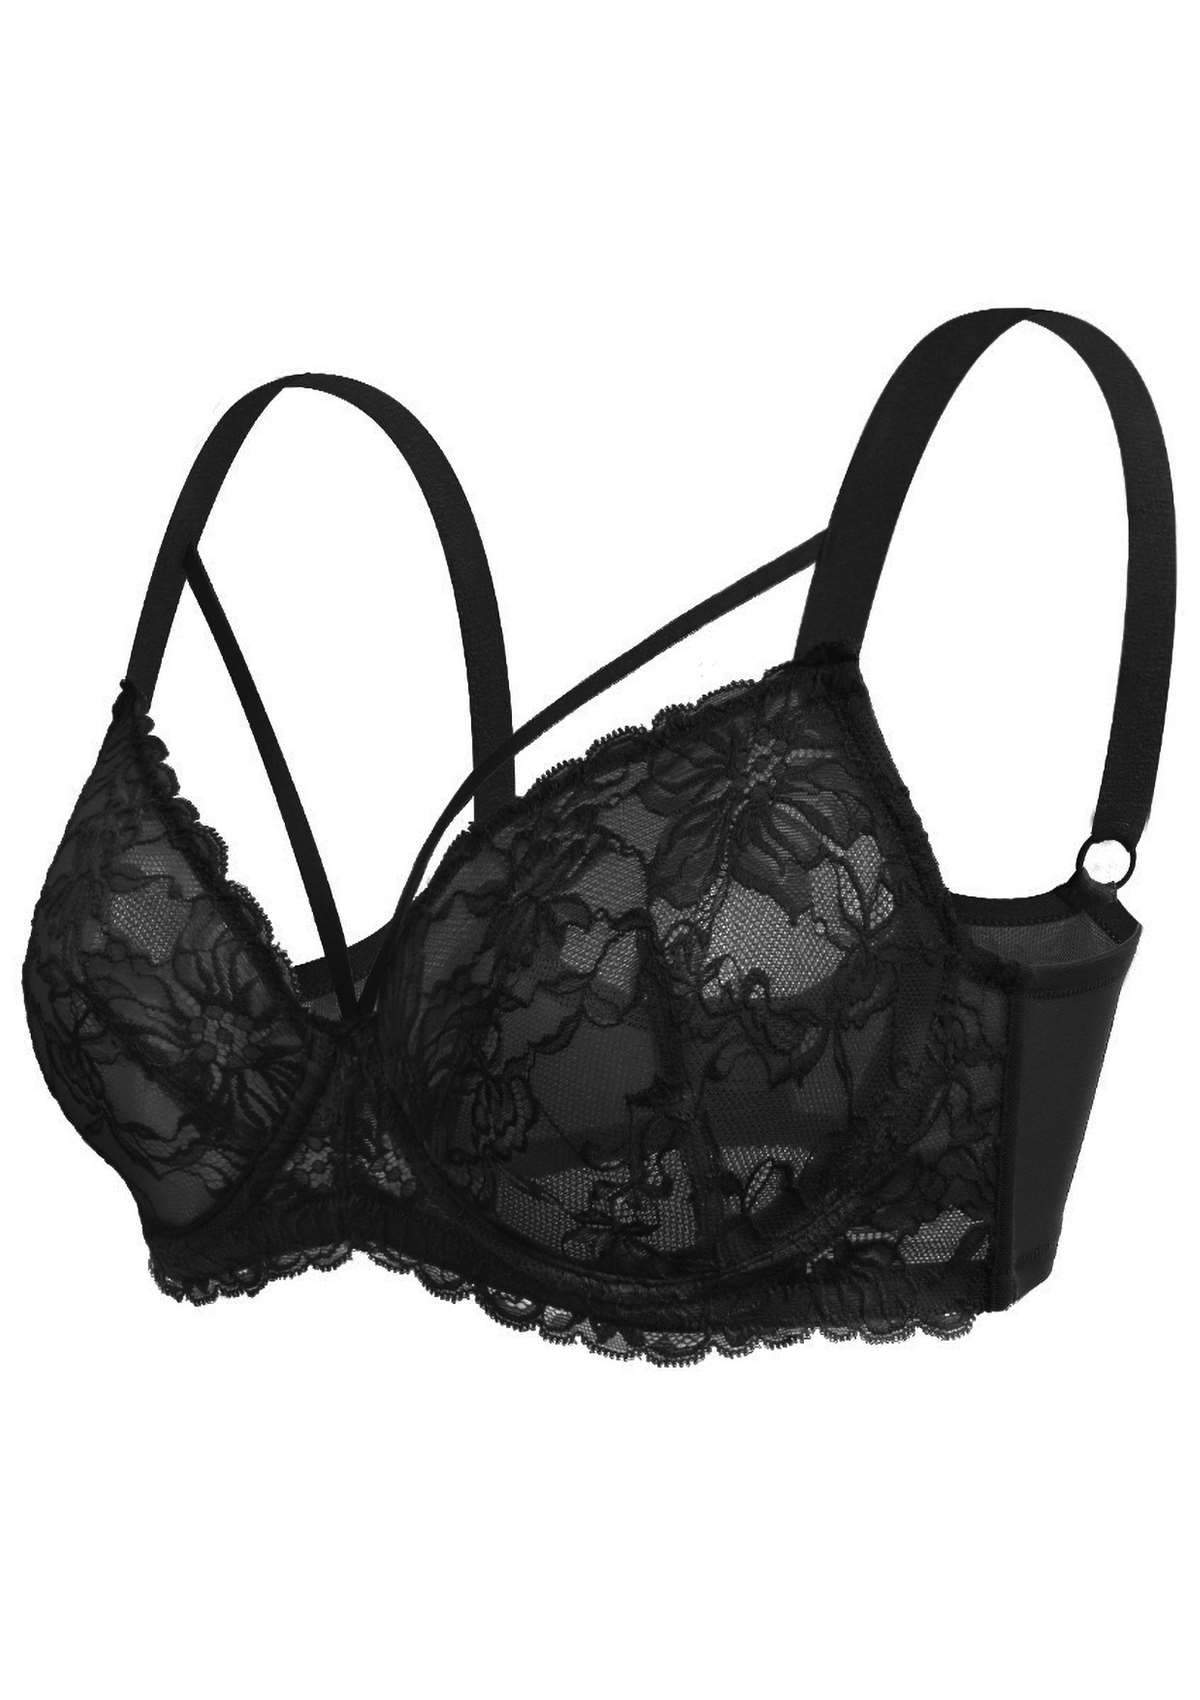 HSIA Pretty In Petals Bra - Plus Size Lingerie For Comfrot And Support - Black / 44 / DDD/F